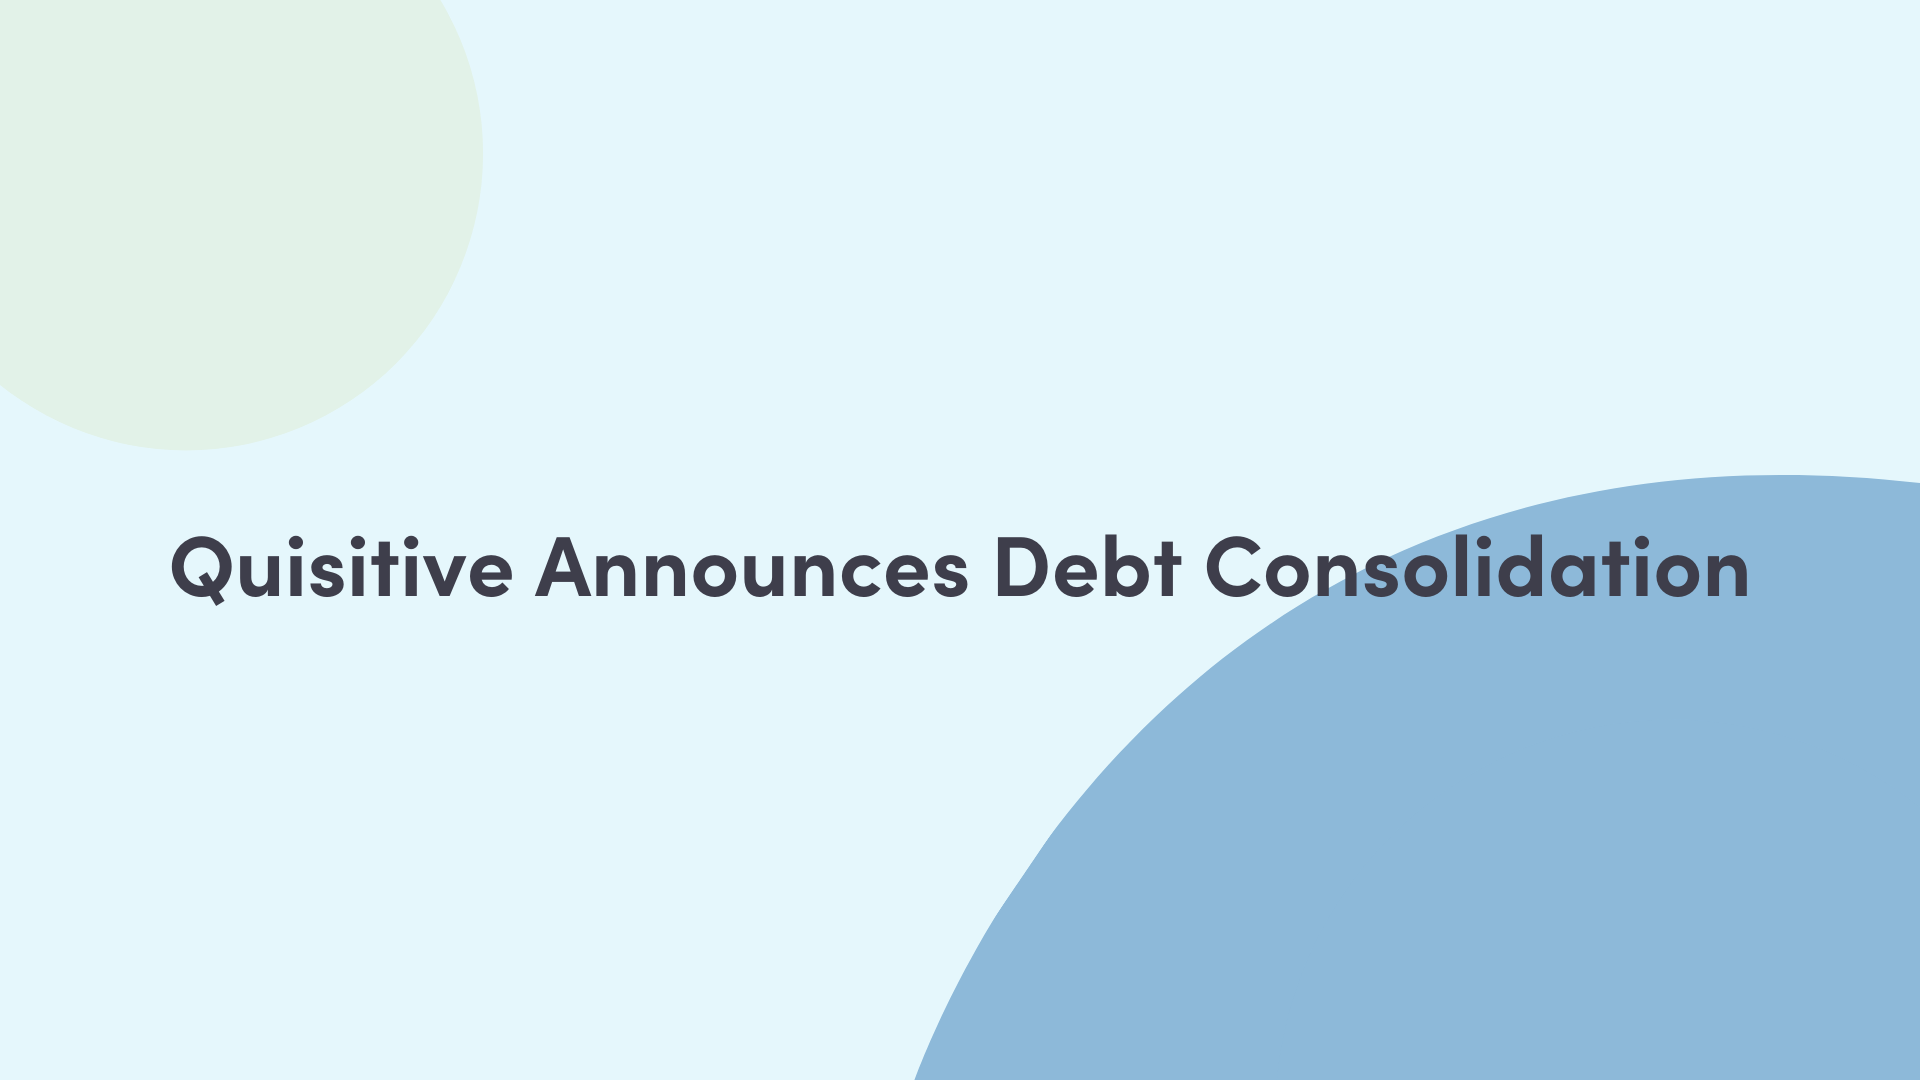 Blue and green background that reads "Quisitive Announces Debt Consolidation"